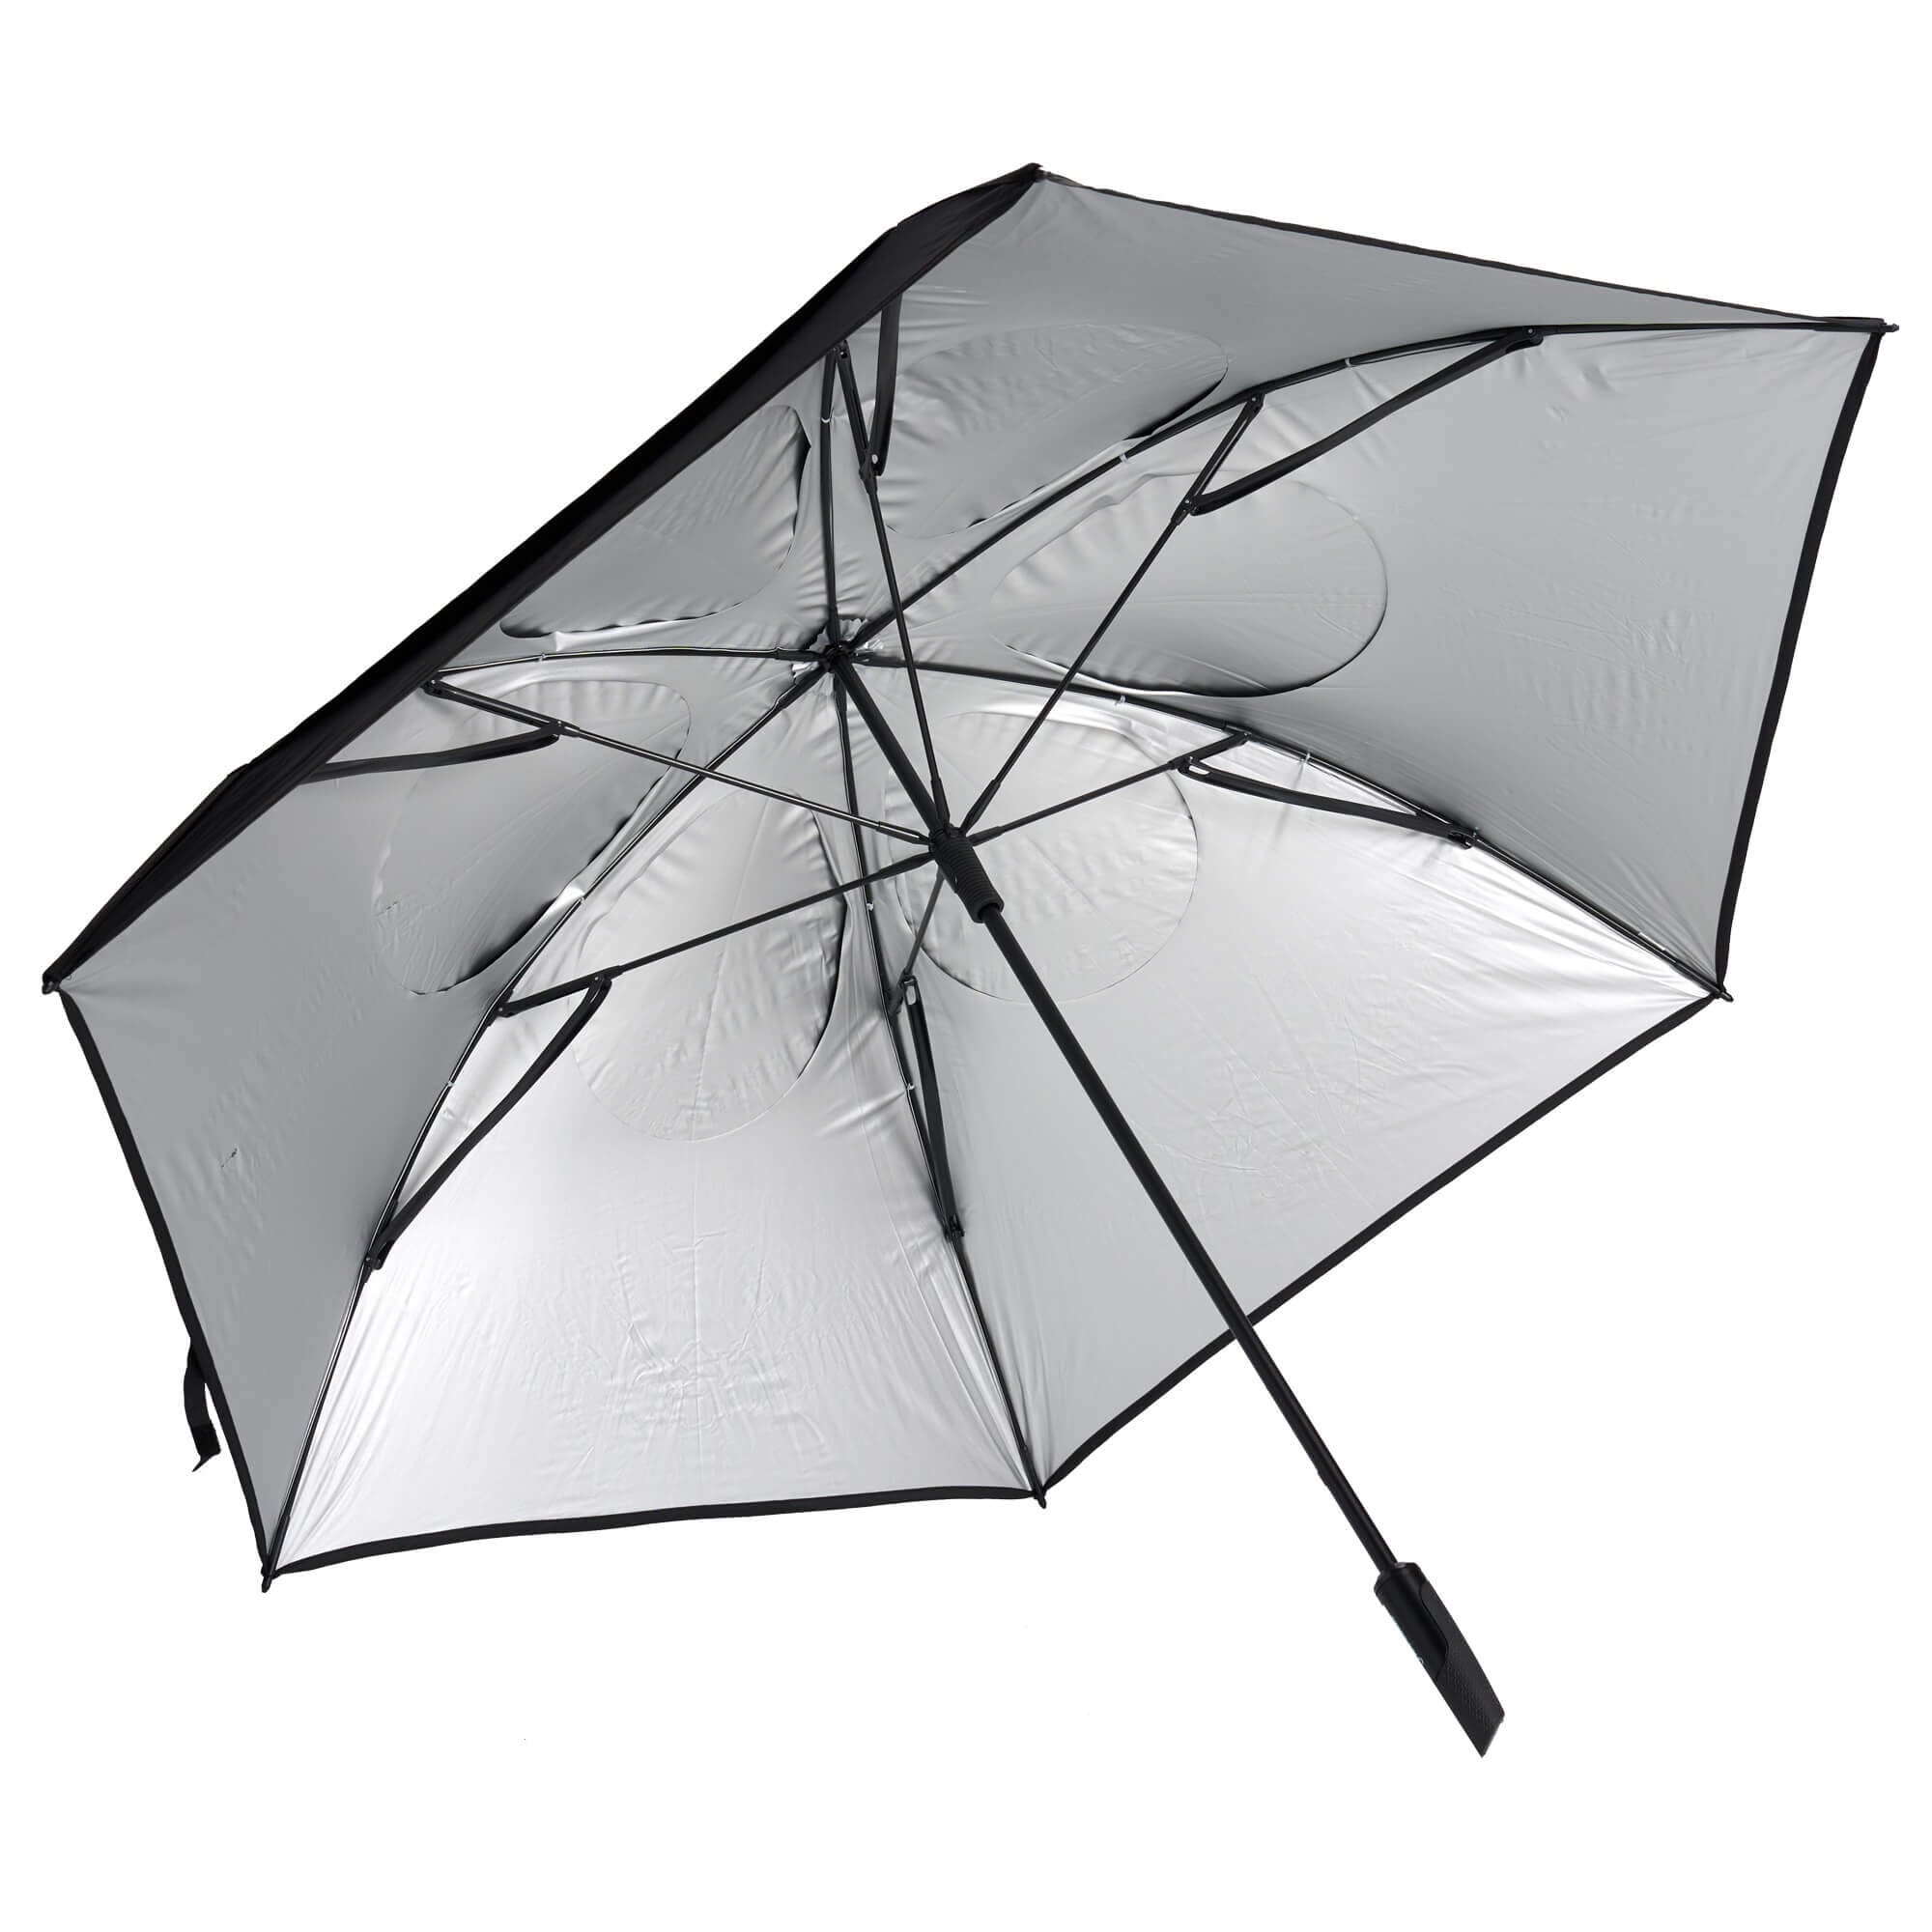 BV Wings Tour Double Canopy Umbrella